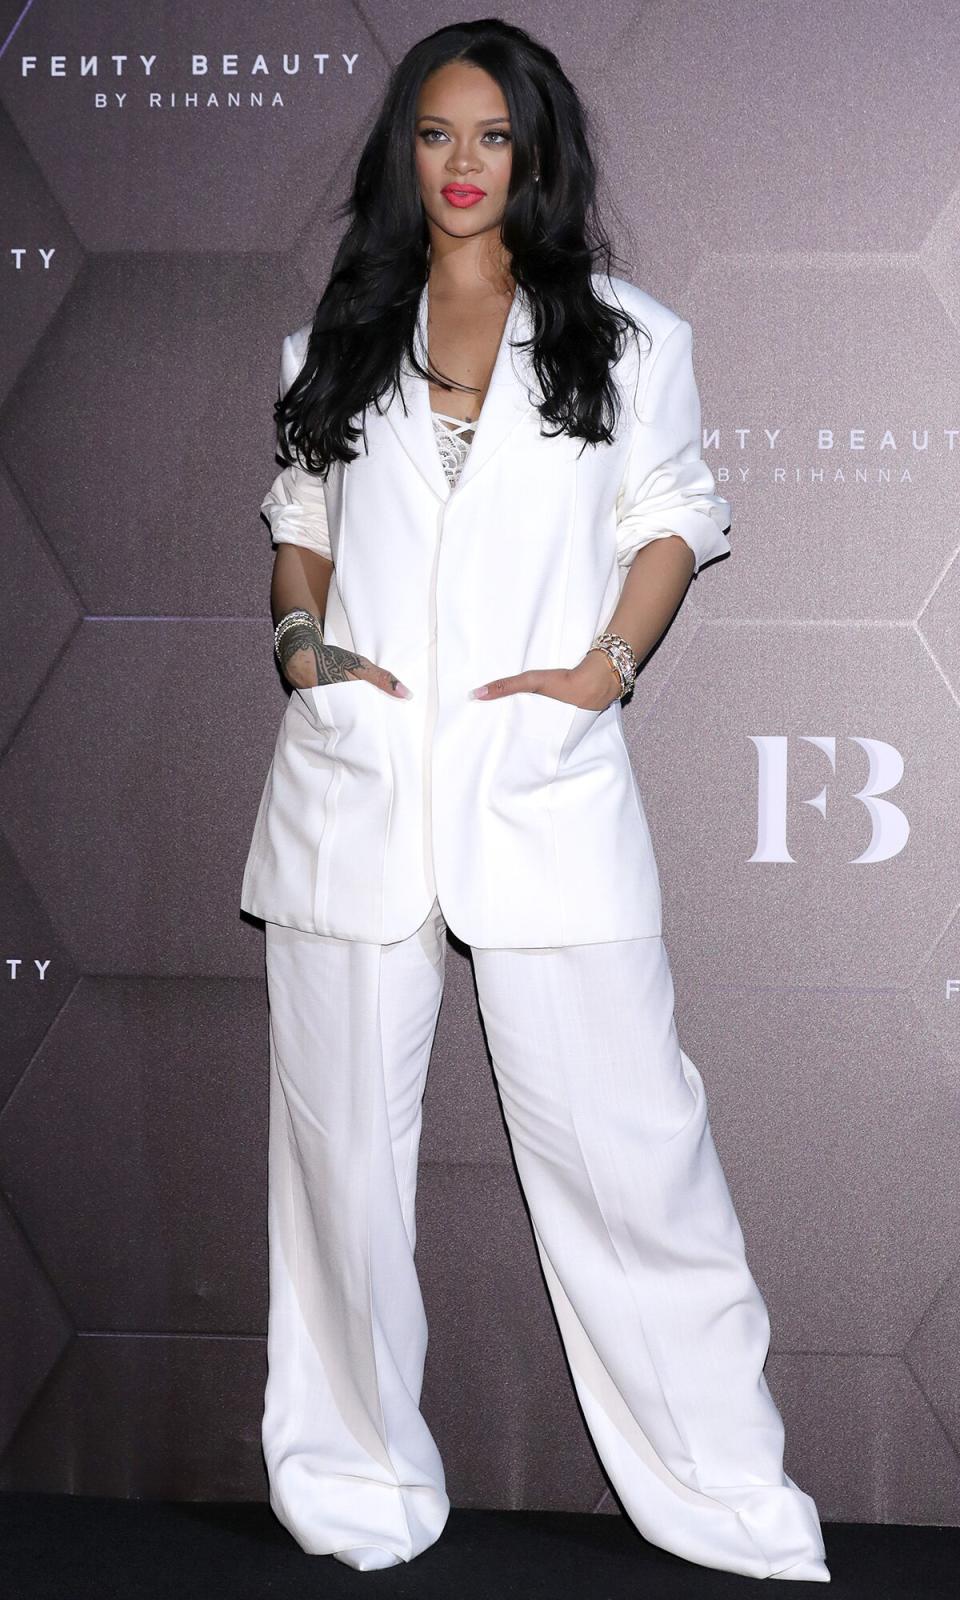 Rihanna attends an event for 'FENTY BEAUTY' artistry beauty talk with Rihanna at Lotte World Tower on September 17, 2019 in Seoul, South Korea